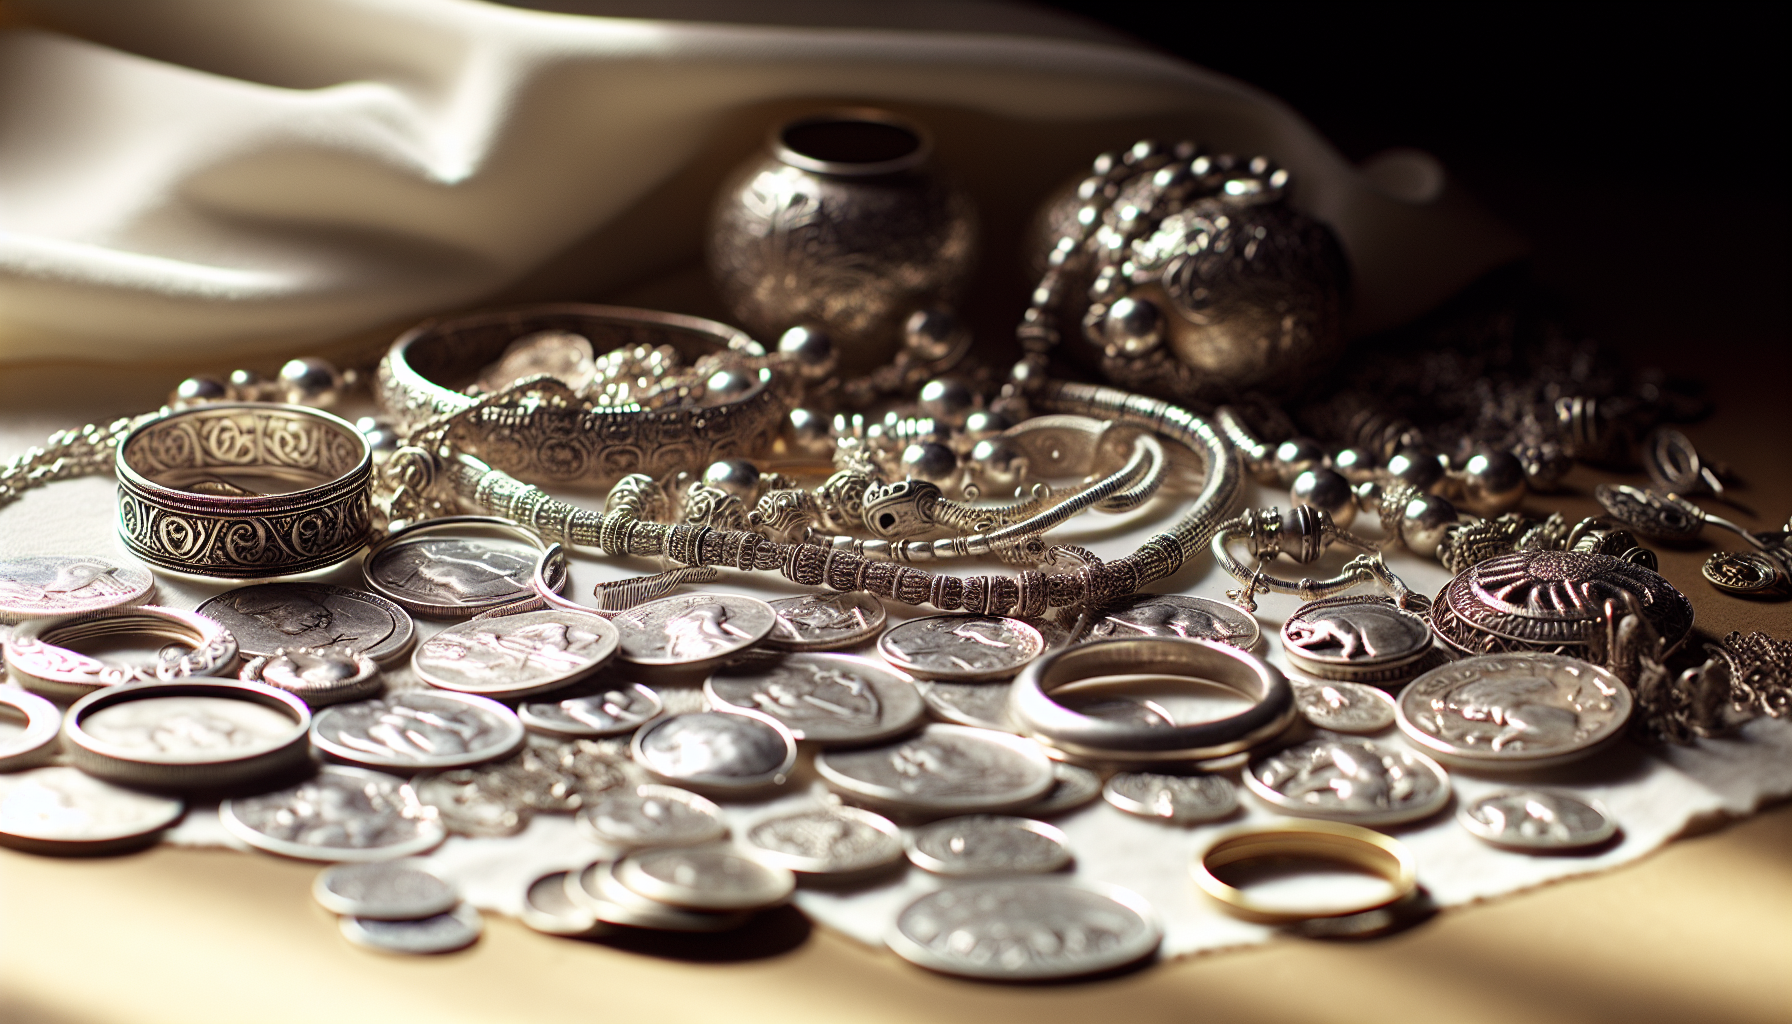 A collection of silver coins and jewelry